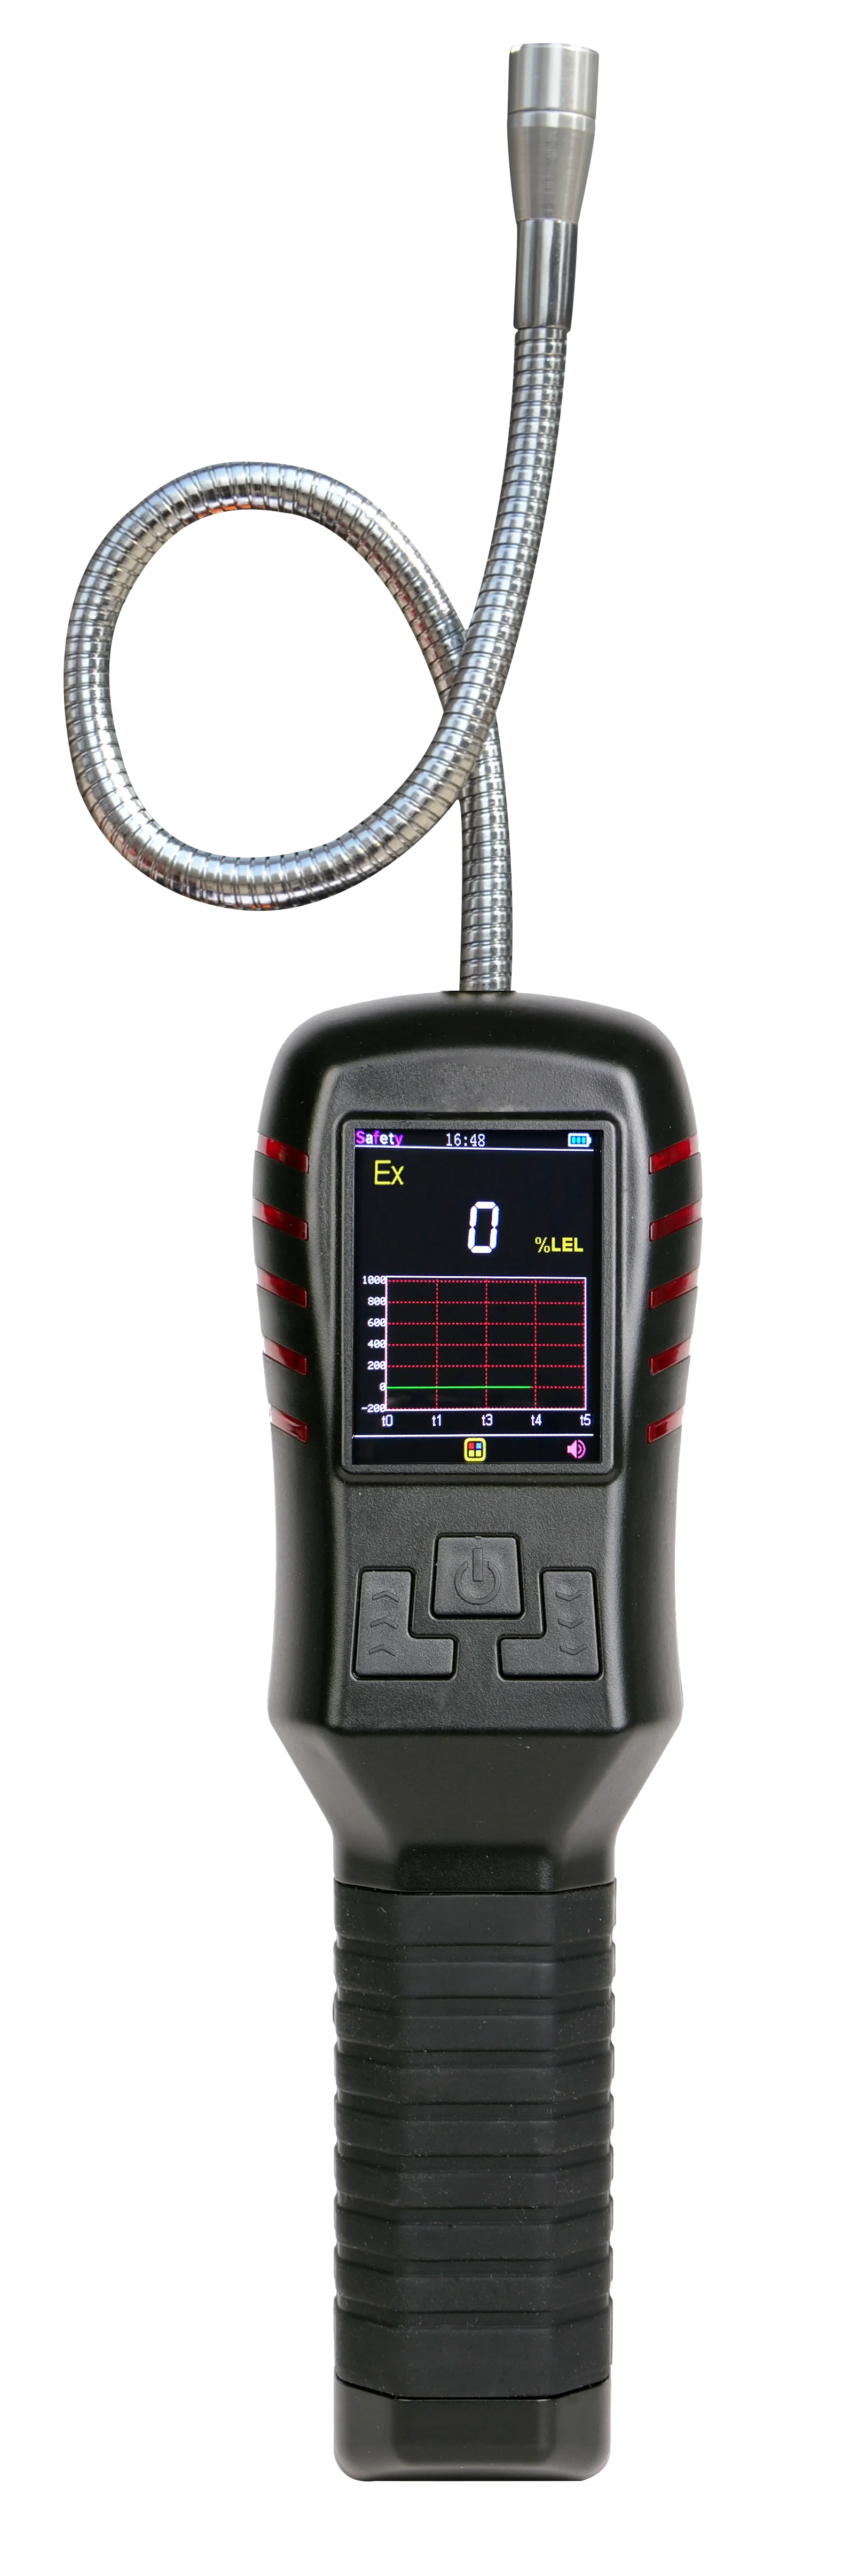 

pipe leak detection He/Helium gas detector, gas analyzer with gooseneck probe and curve display S311